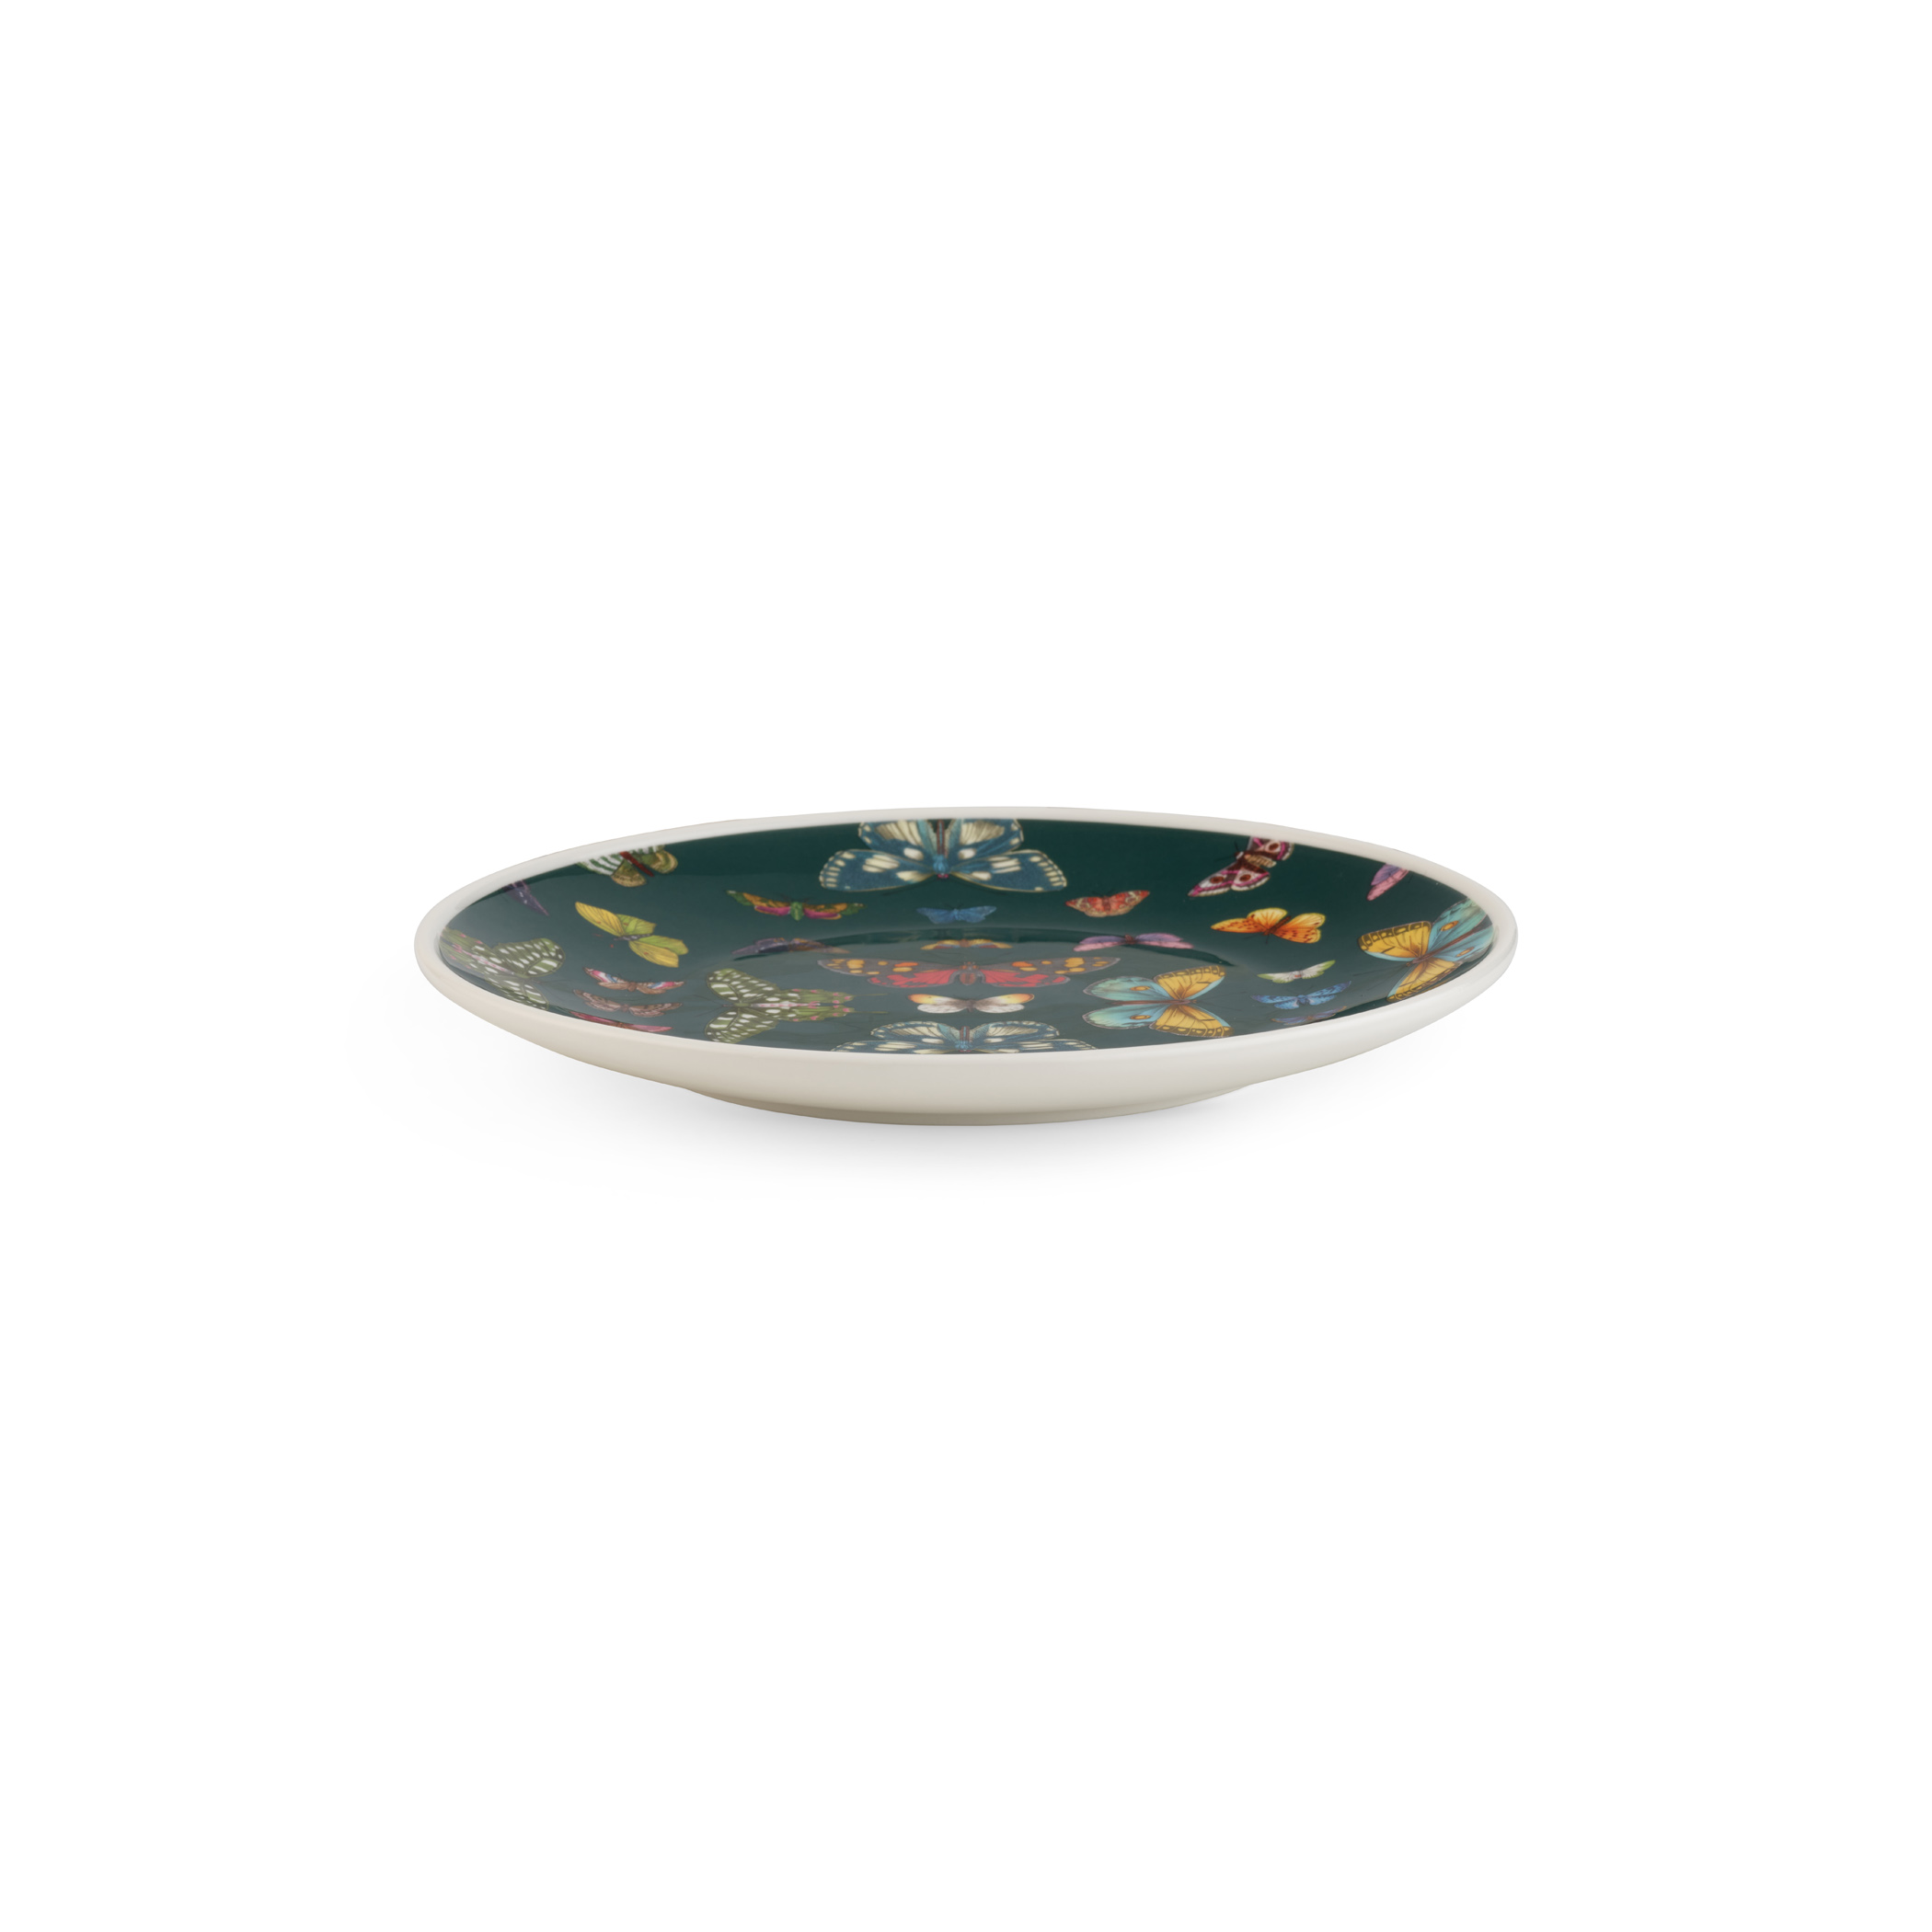 Botanic Garden Harmony Accents Green 8.5 Inch Coupe Plate image number null